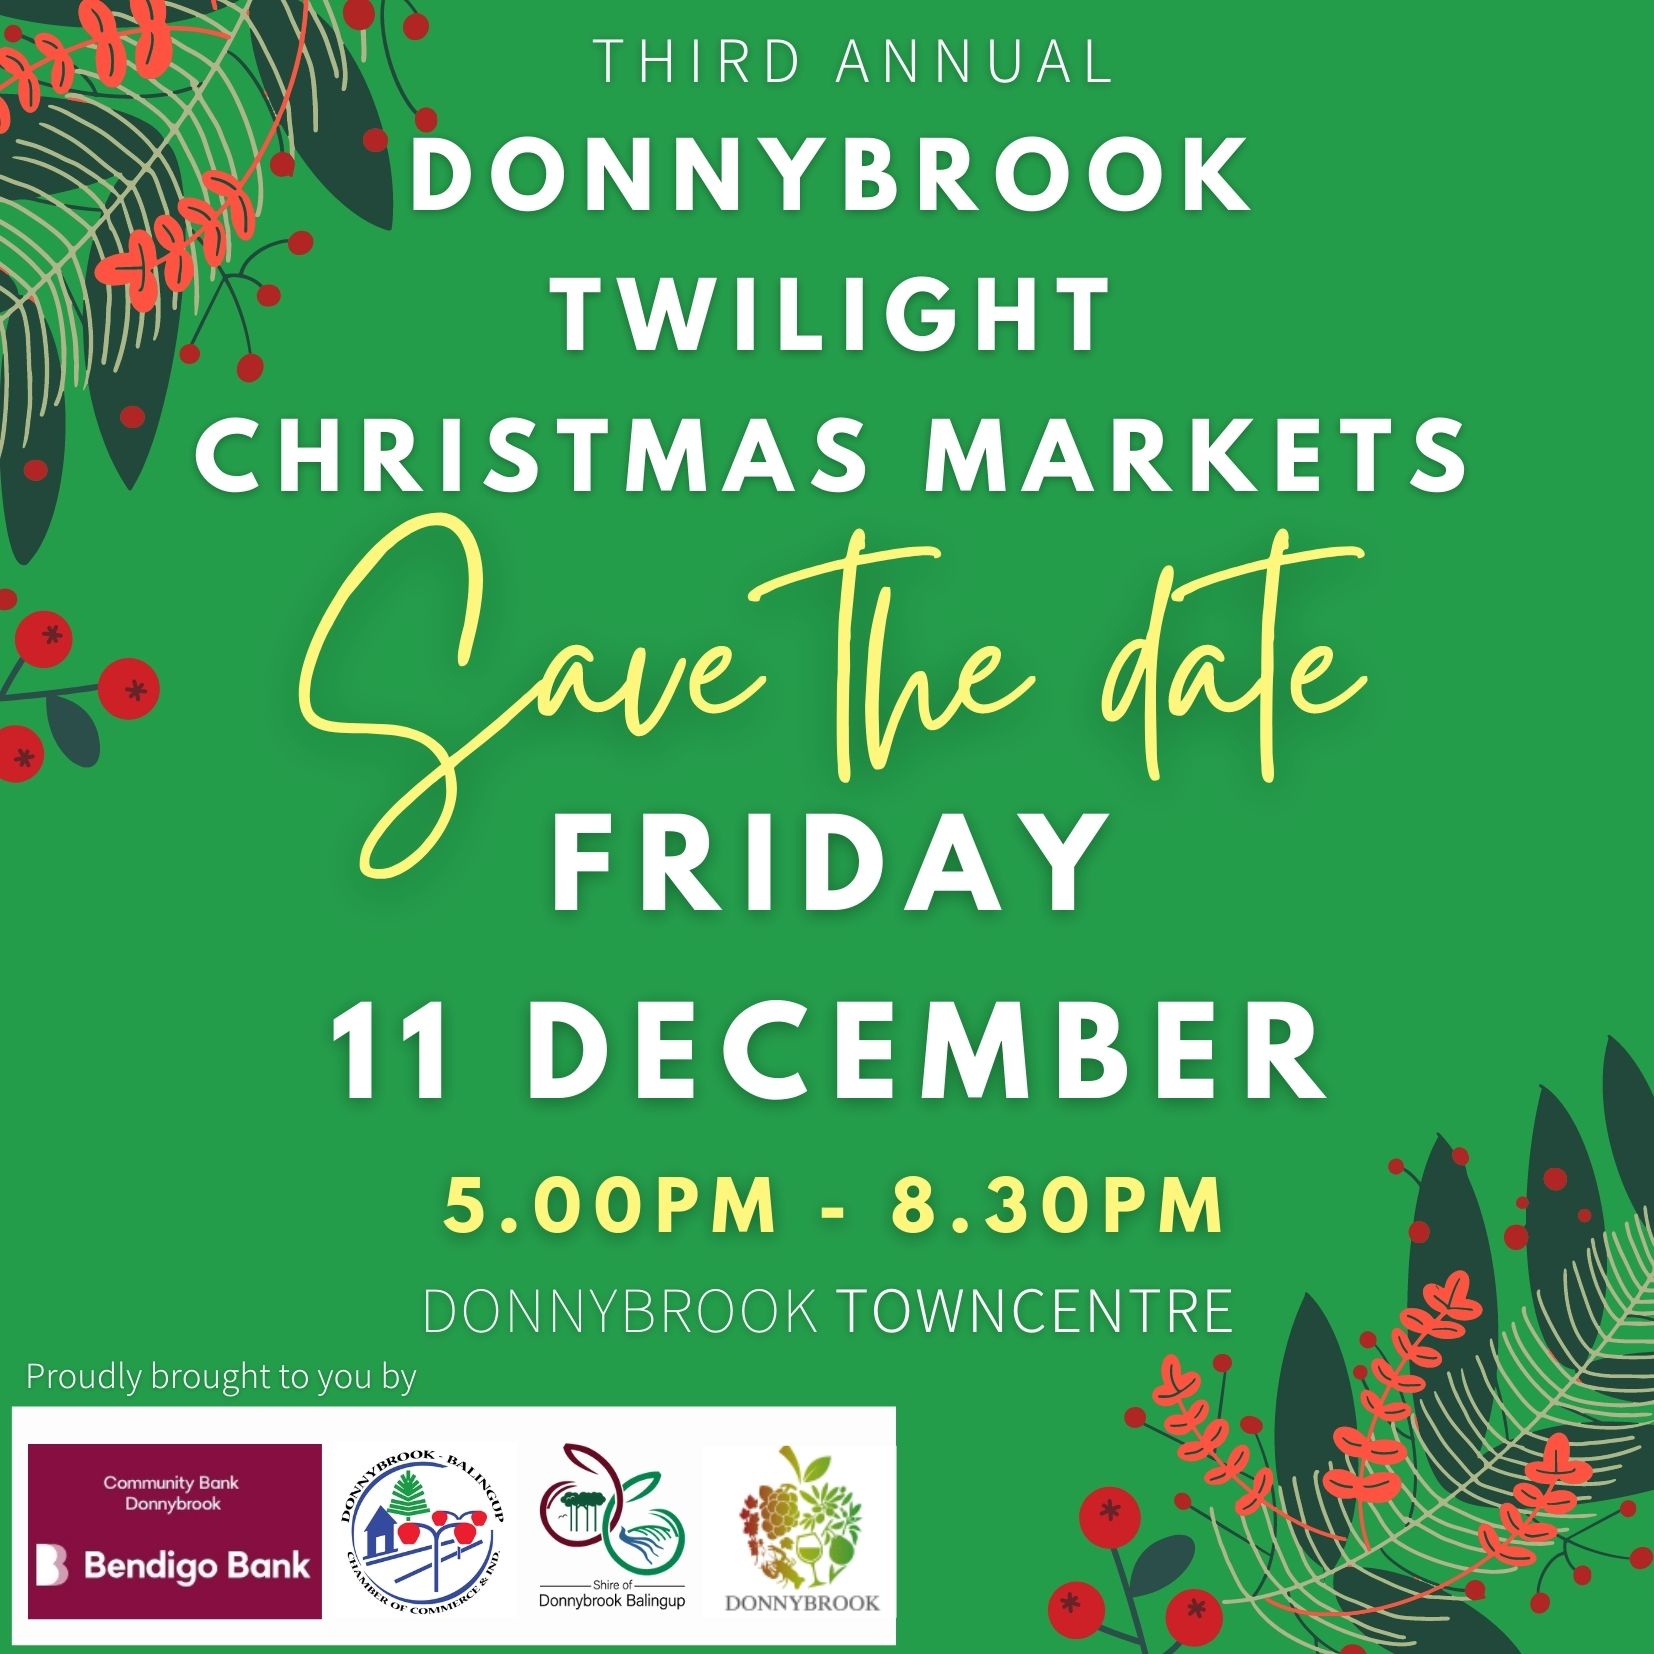 Events - Donnybrook Balingup Chamber of Commerce